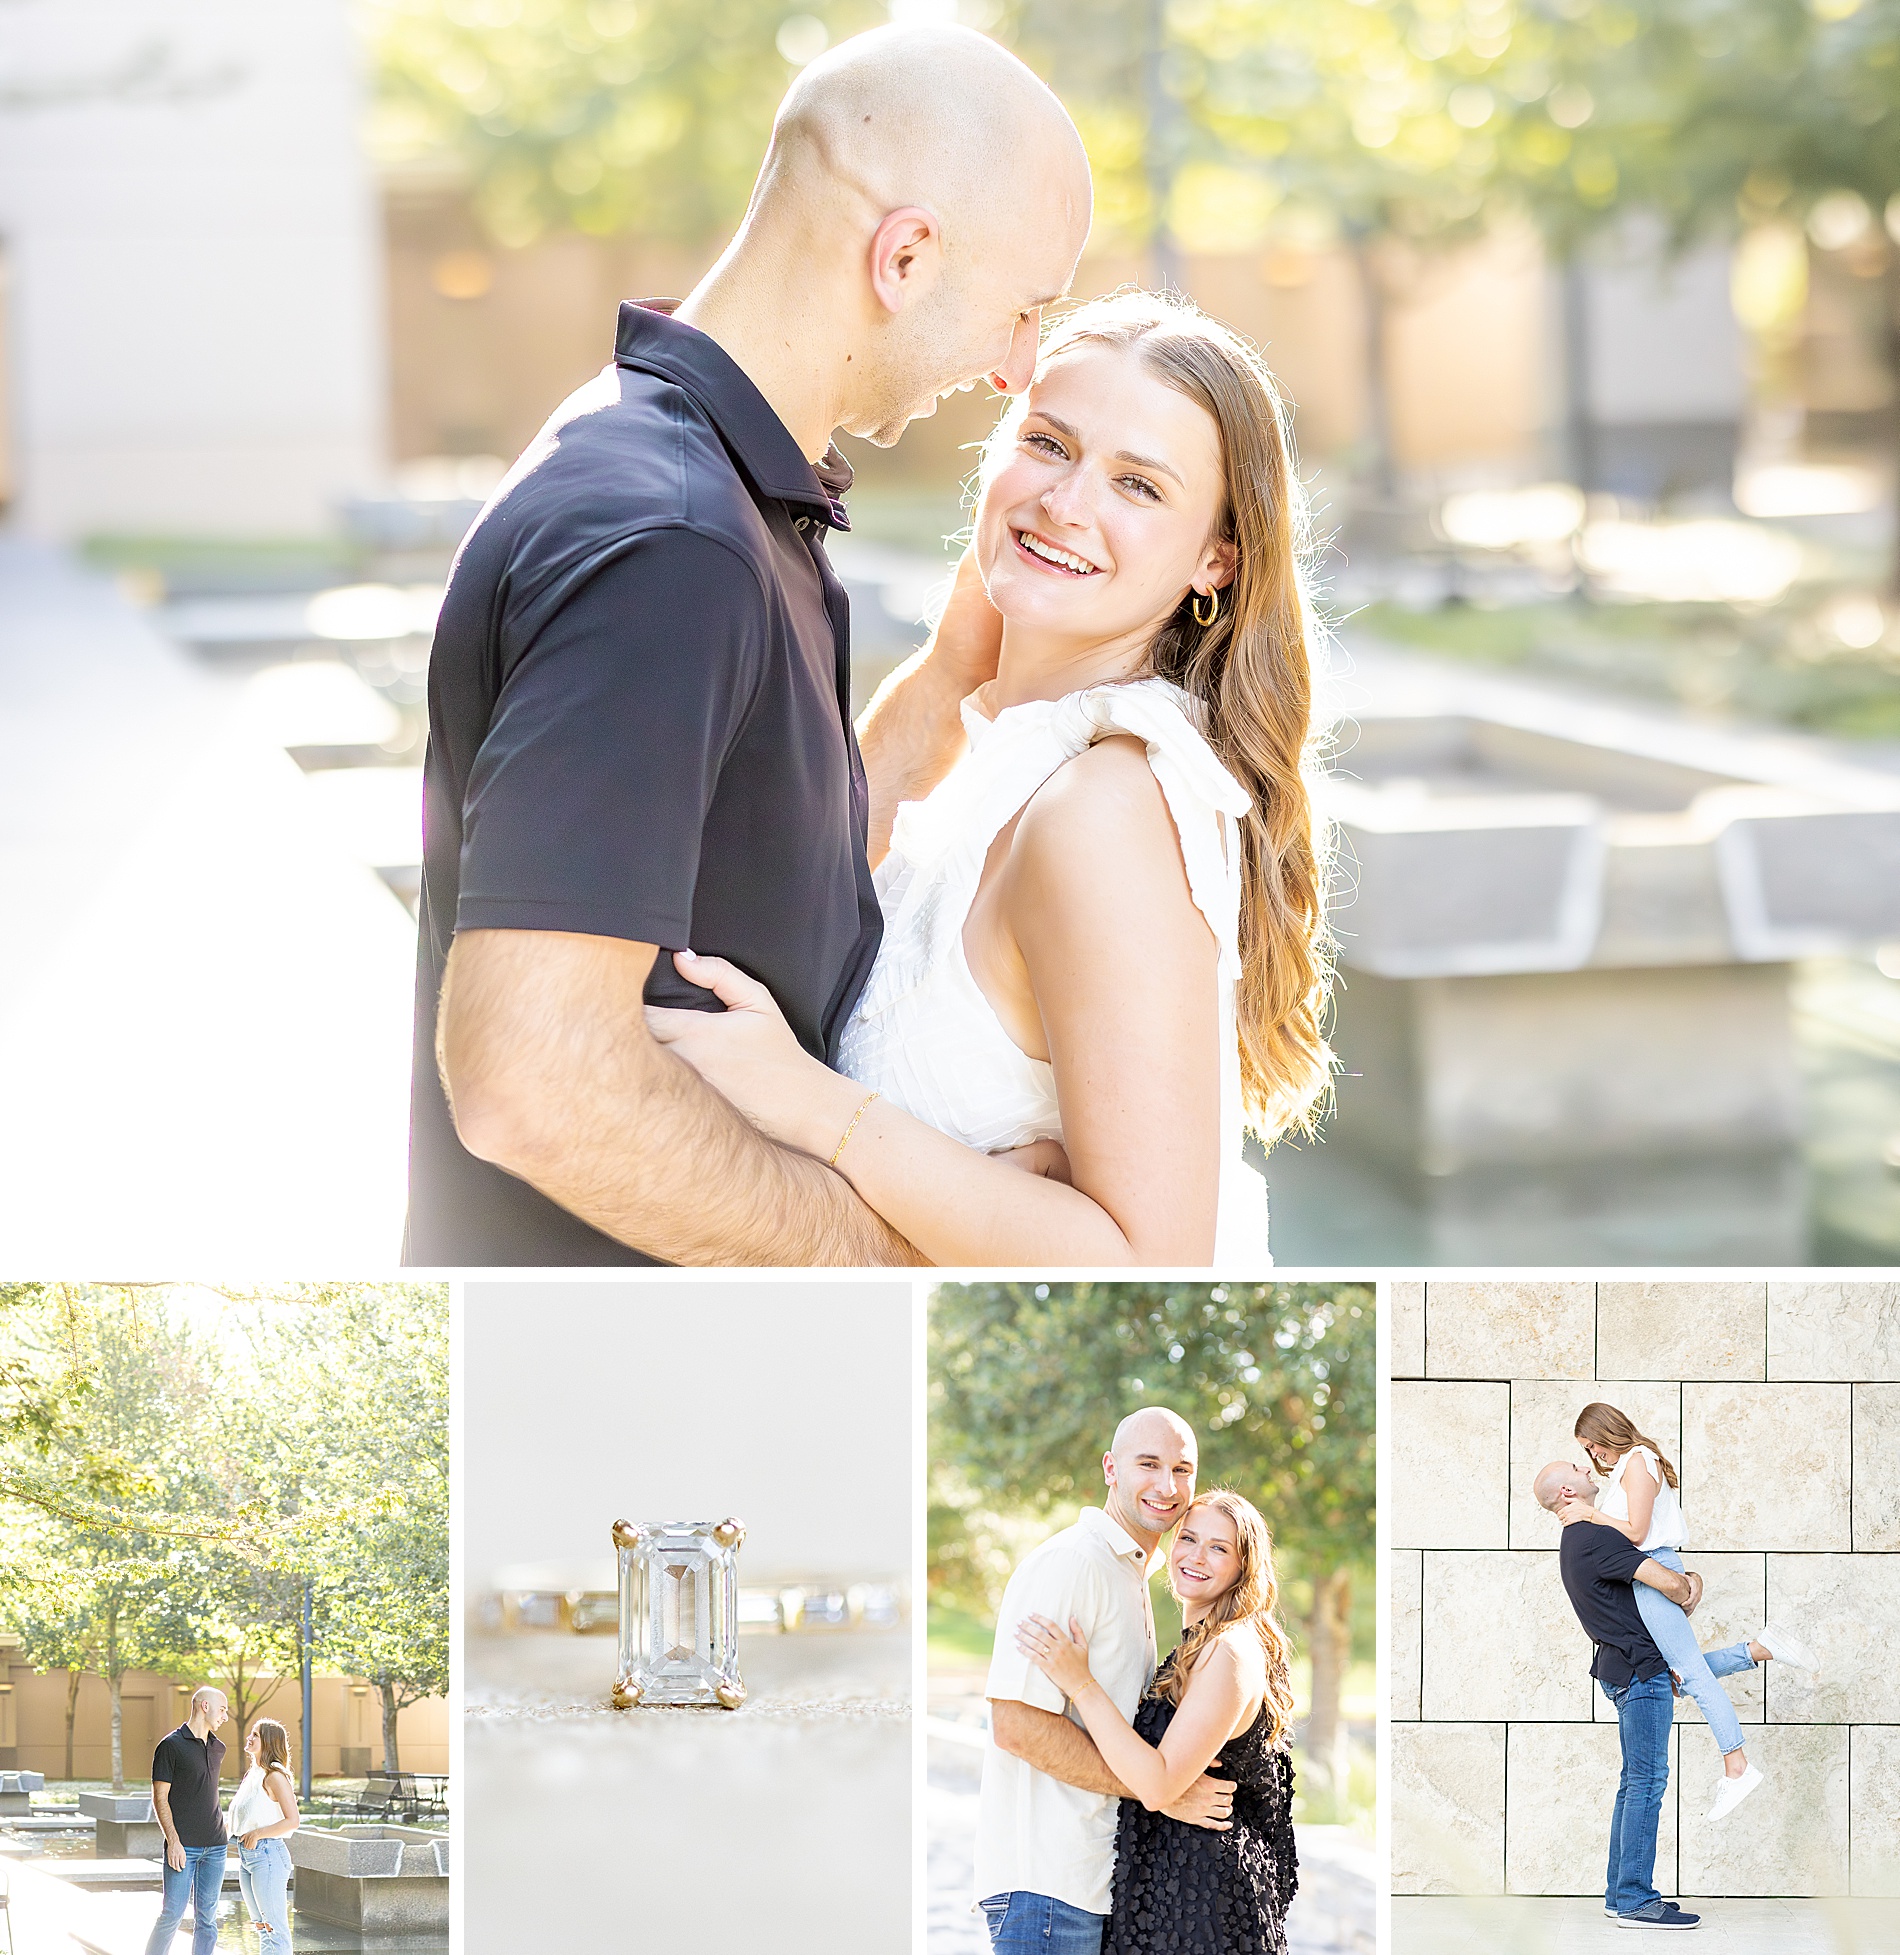 Golden Hour Engagement Session in Houston Texas by South Carolina based Luxury Wedding Photographer, Sarah Claire Portraiture